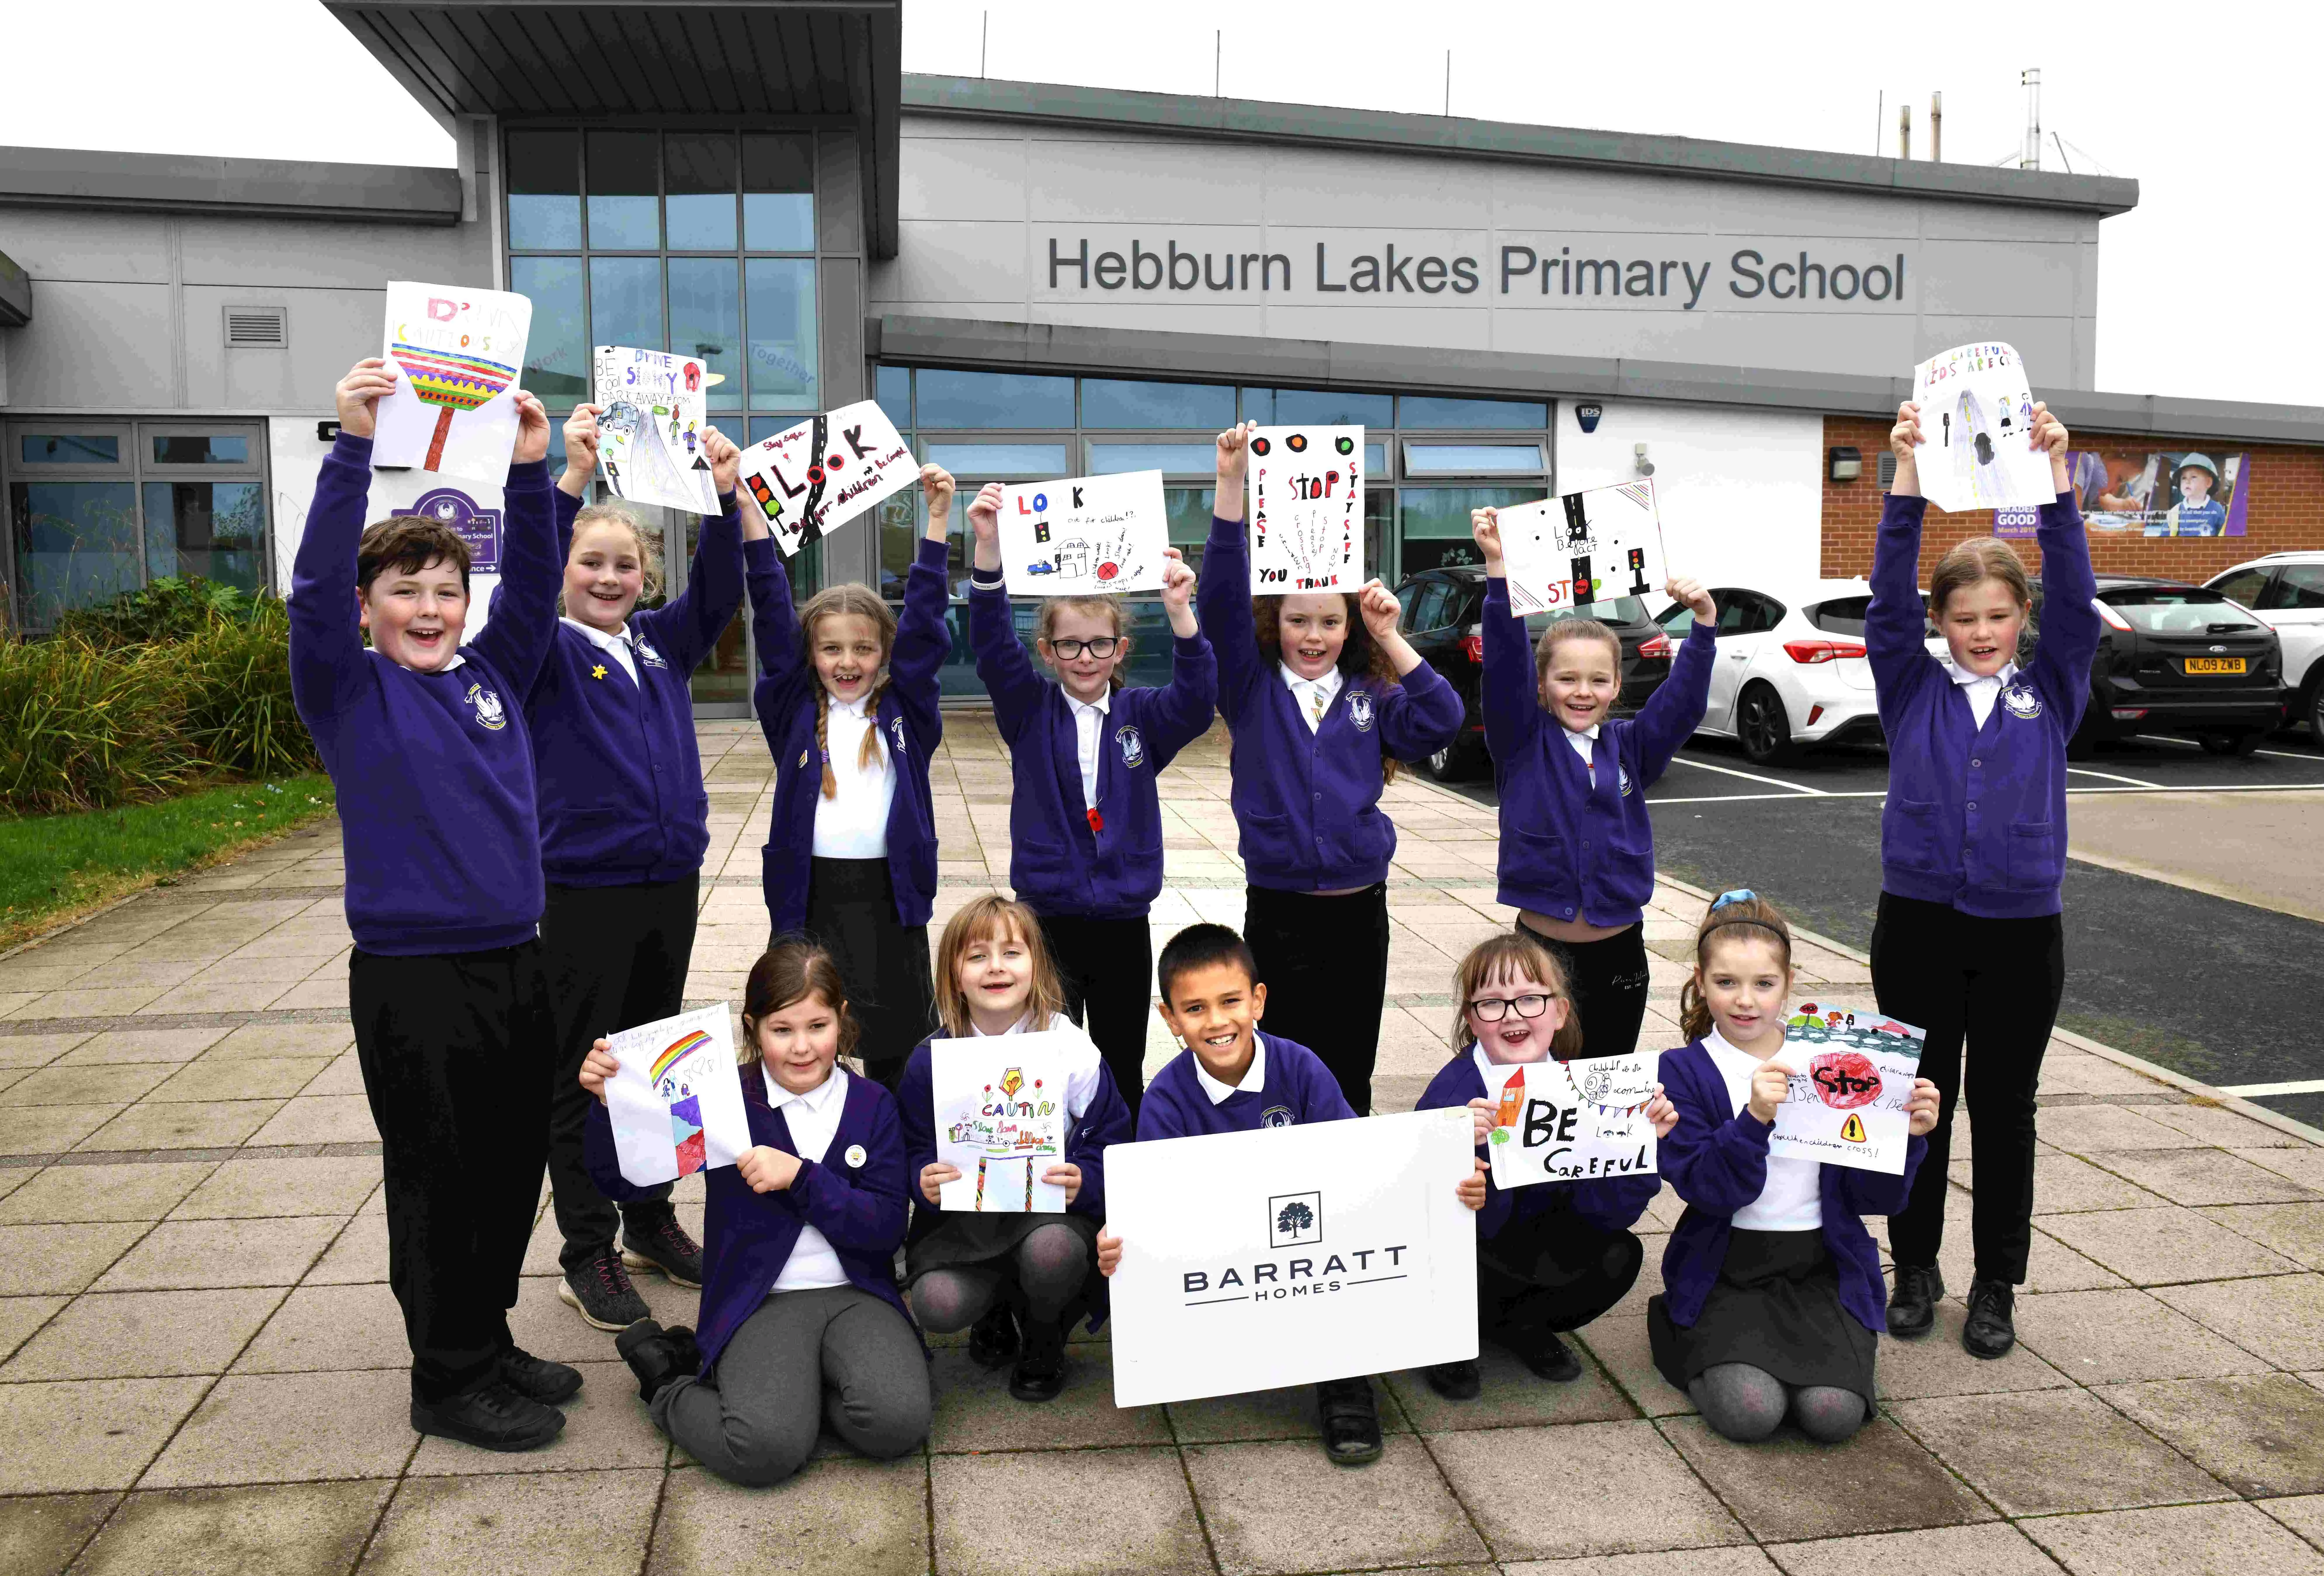 The students at Hebburn Lakes Primary School show off their road posters